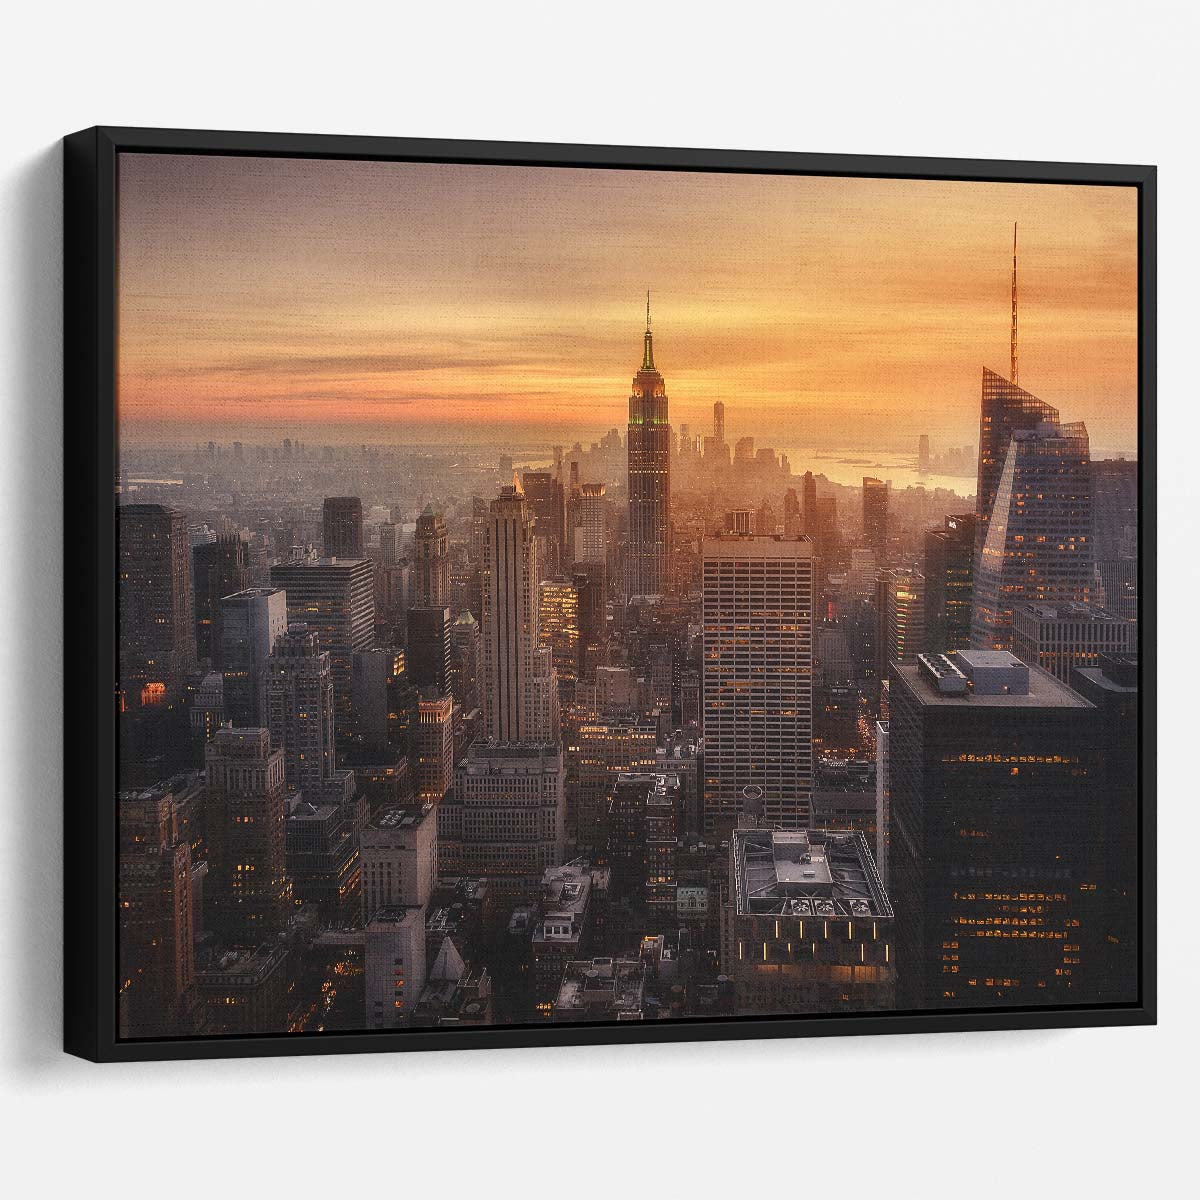 NYC Empire State Sunset Skyline Fine Art Wall Art by Luxuriance Designs. Made in USA.